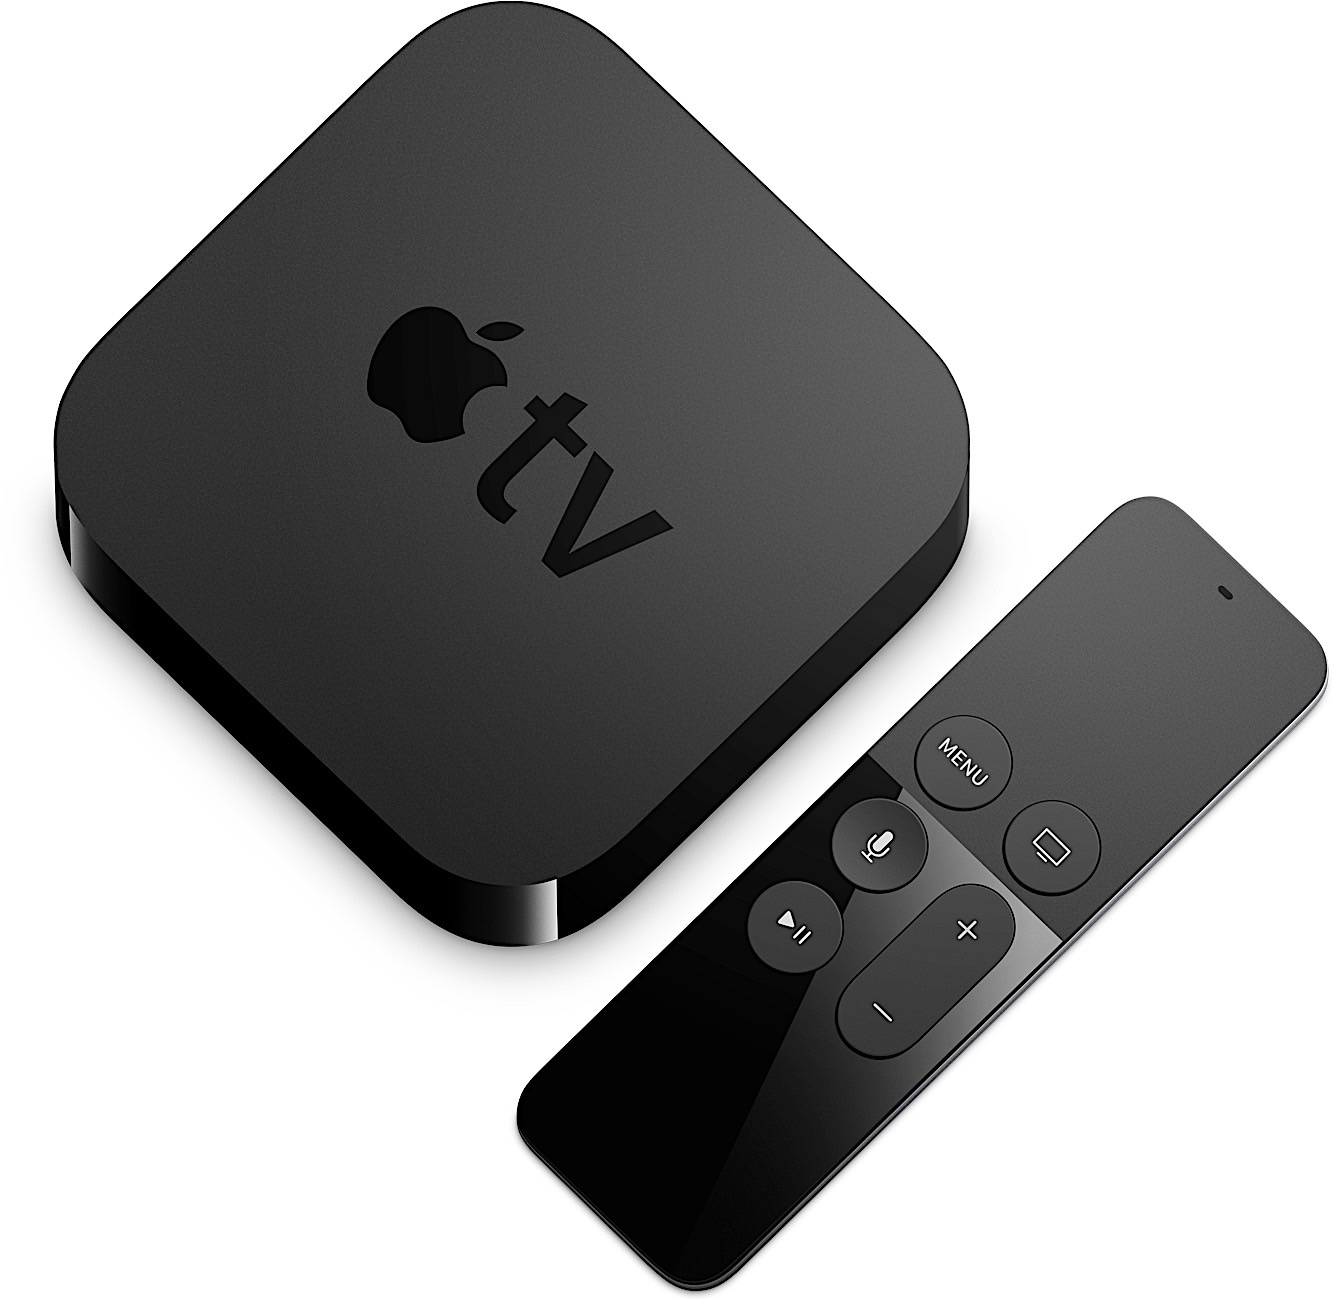 7 Things to Know About the New Apple TV Release